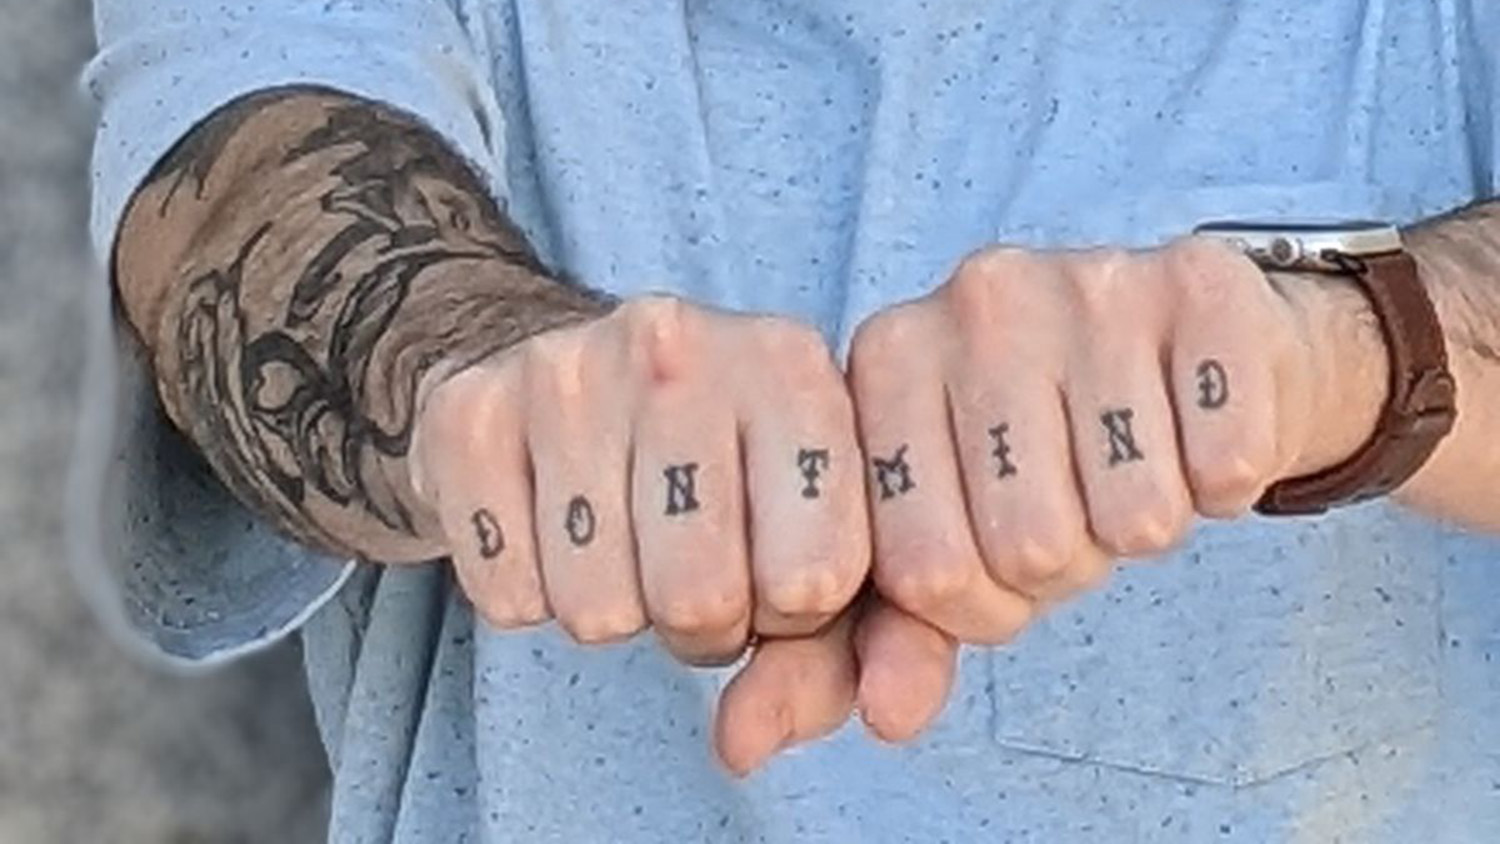 NC State alum Dylan Ebbs has tattoos on the fingers of each of his knuckles that spell out "don't mind," symbolizing his willingness to talk about his mental health journey.